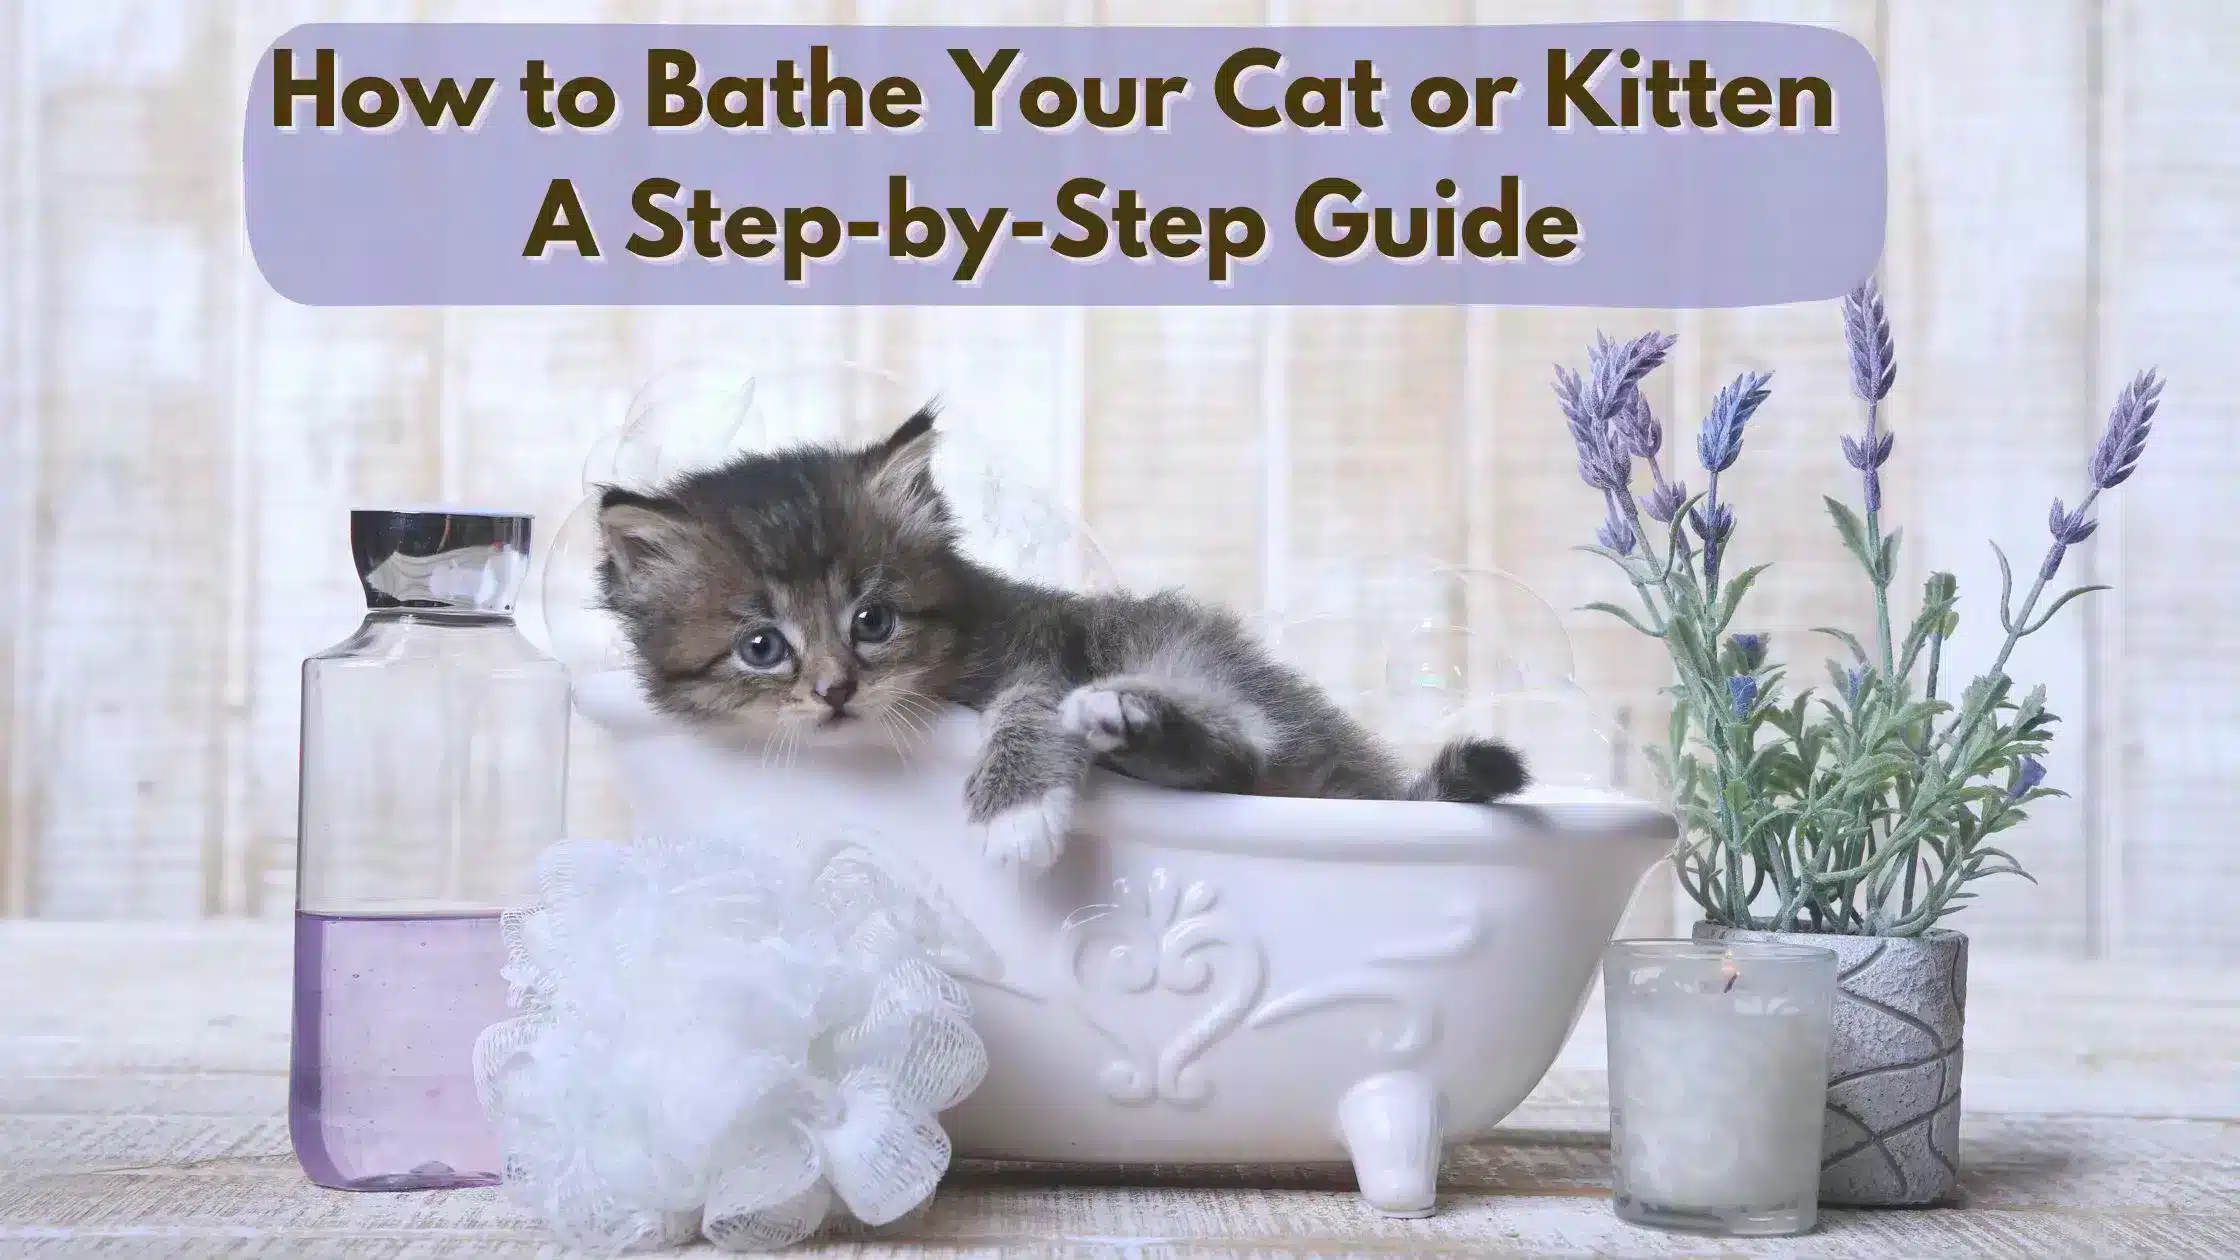 How to bathe a cat with Adorable Kitten in A Bathtub Relaxing